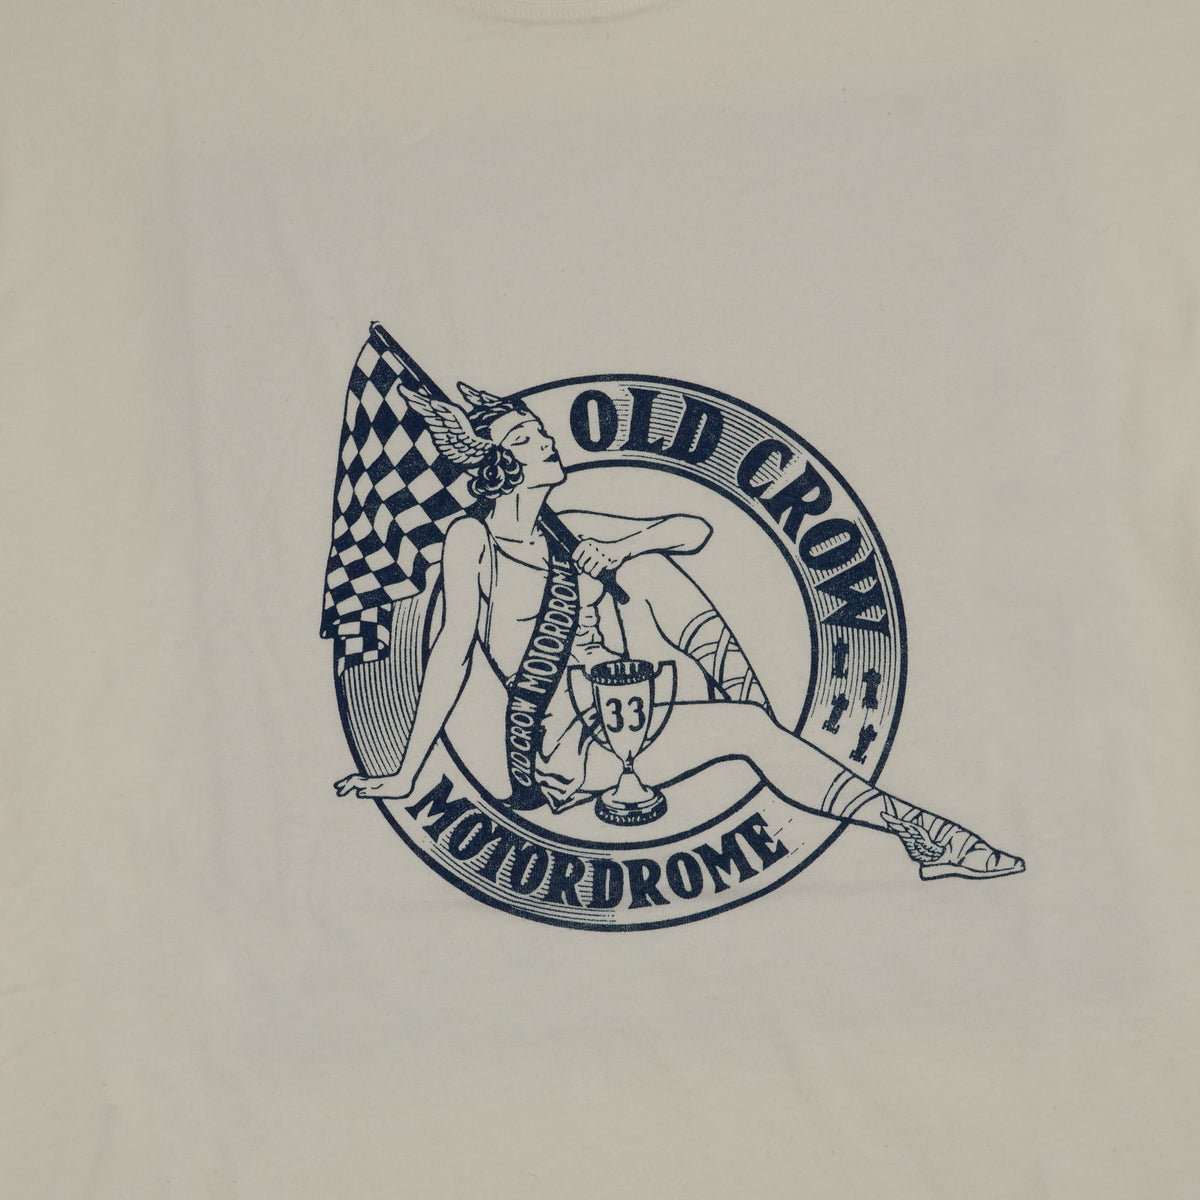 Old Crow Speed Shop by Glad Hand &amp; Co. Motodromo Crew Neck Short Sleeve T-Shirt